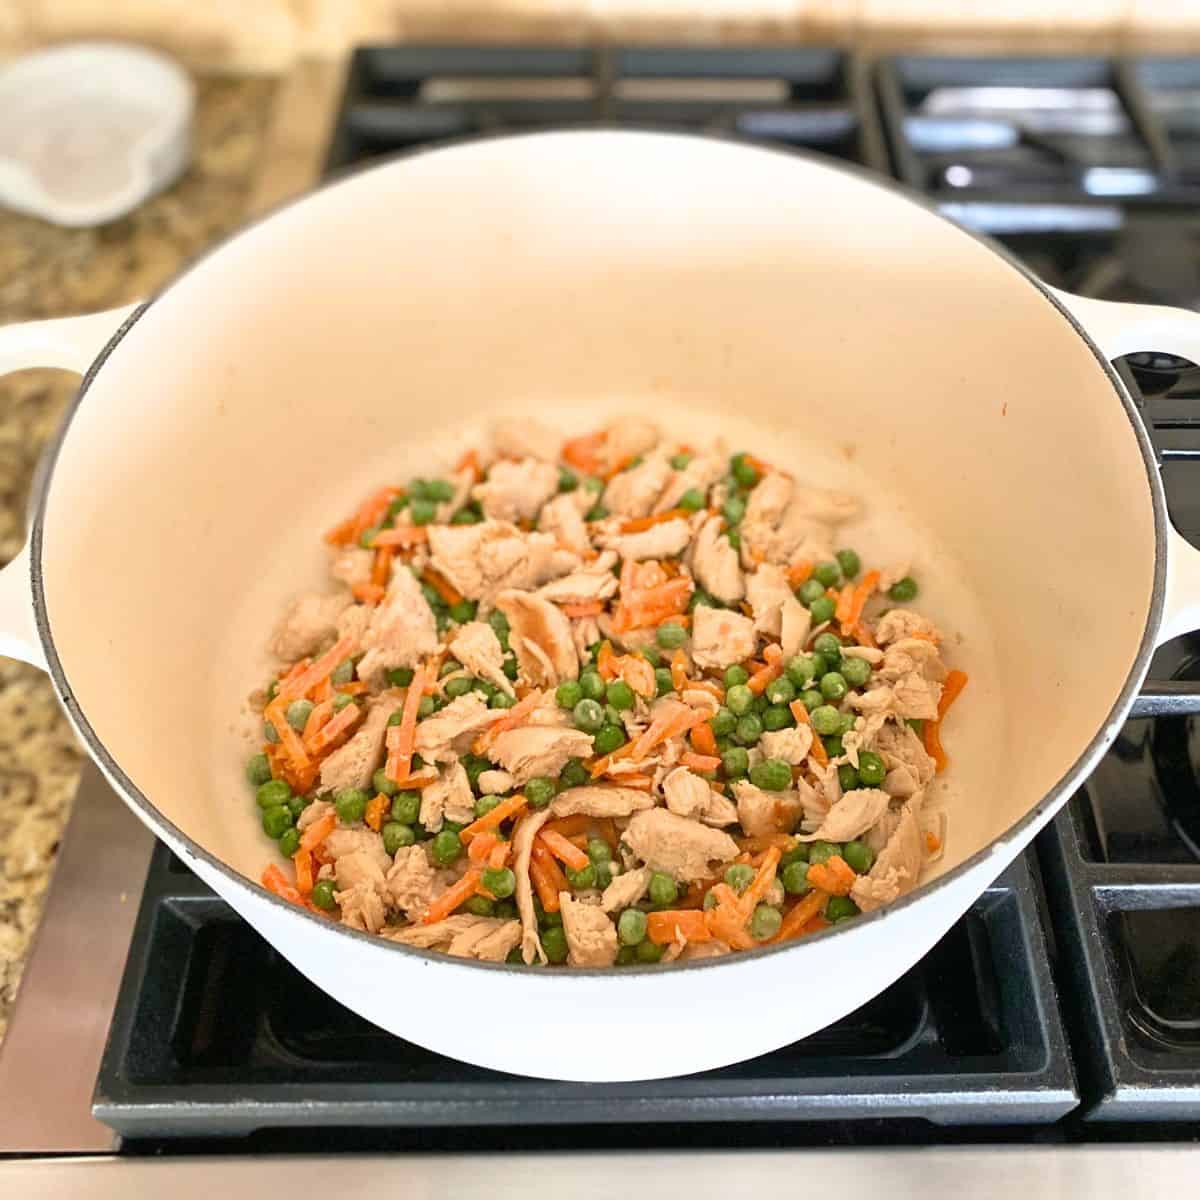 cooked chicken with peas and carrots